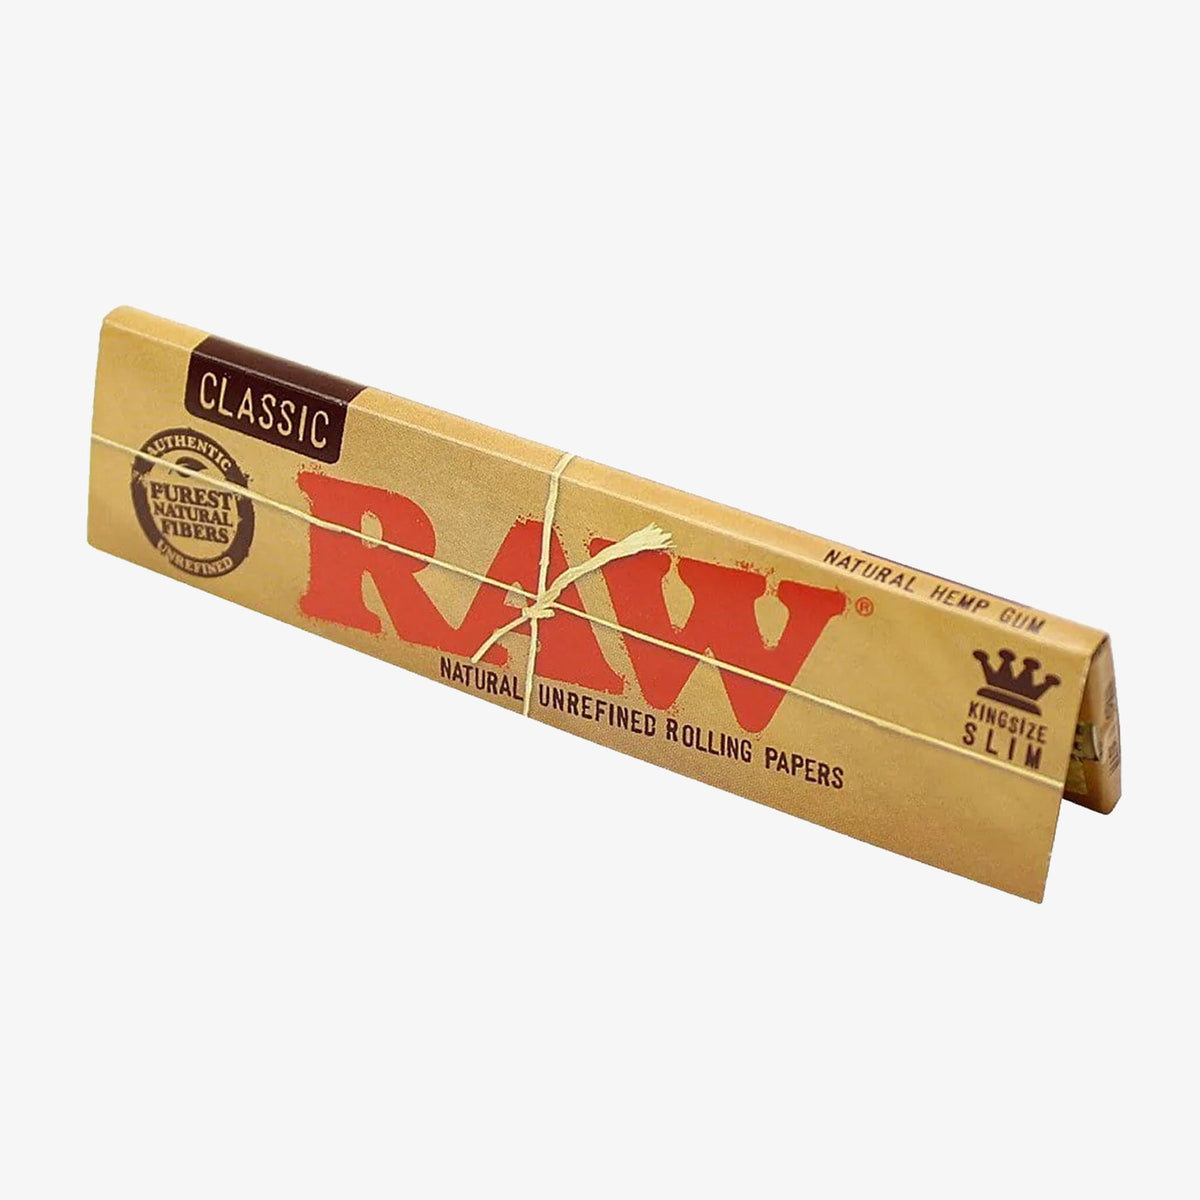 RAW Classic King Size Slim Rollings Papers